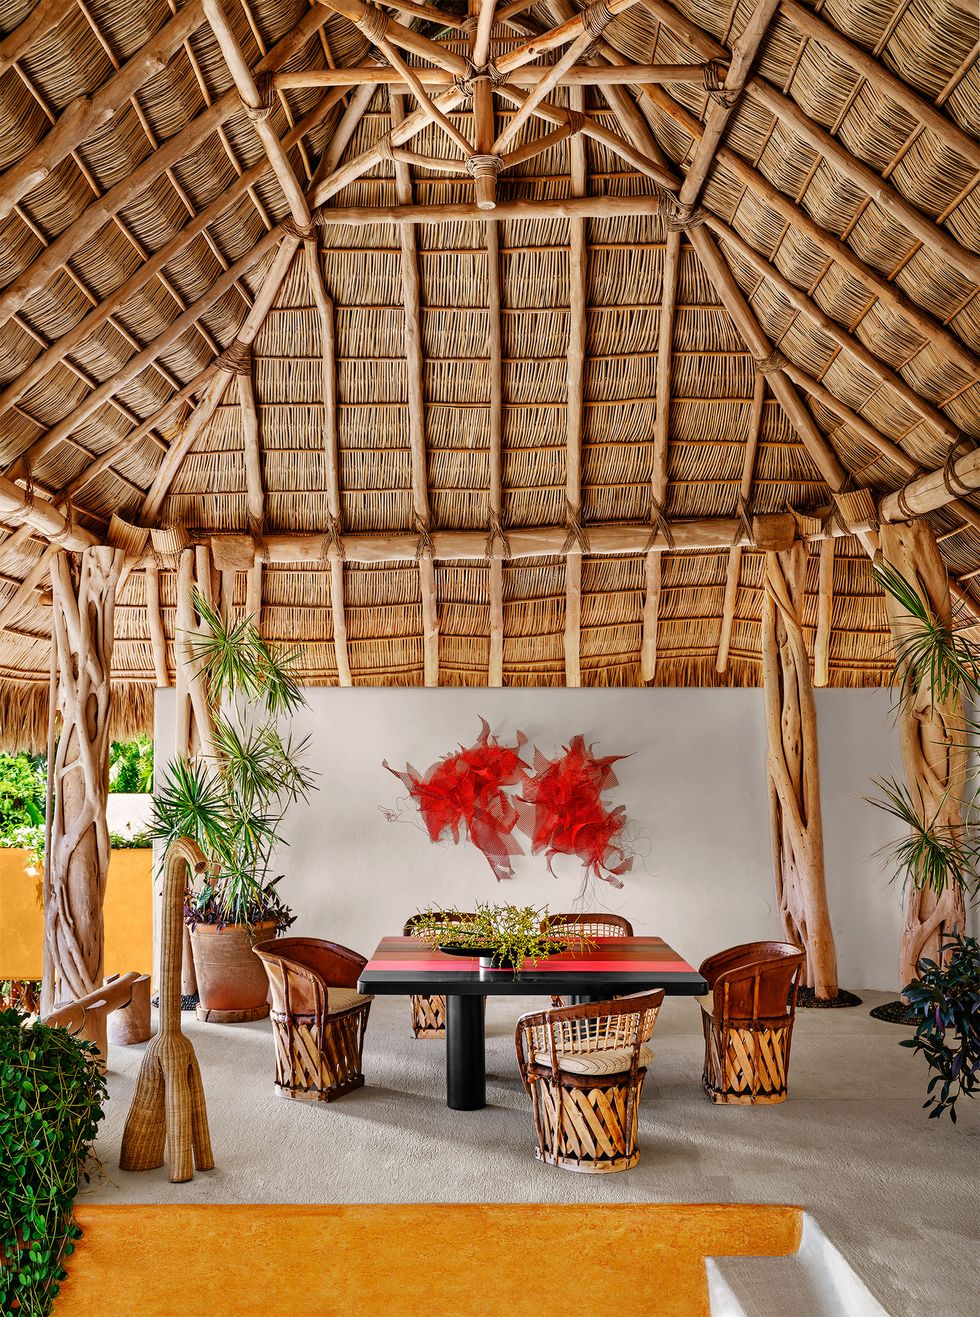 in a dining palapa with a thatched roof is a square black table with bands of red and other colors on top, five barrel chairs, a standing woven sculpture, and a red metal mesh wall artwork, and some potted plants